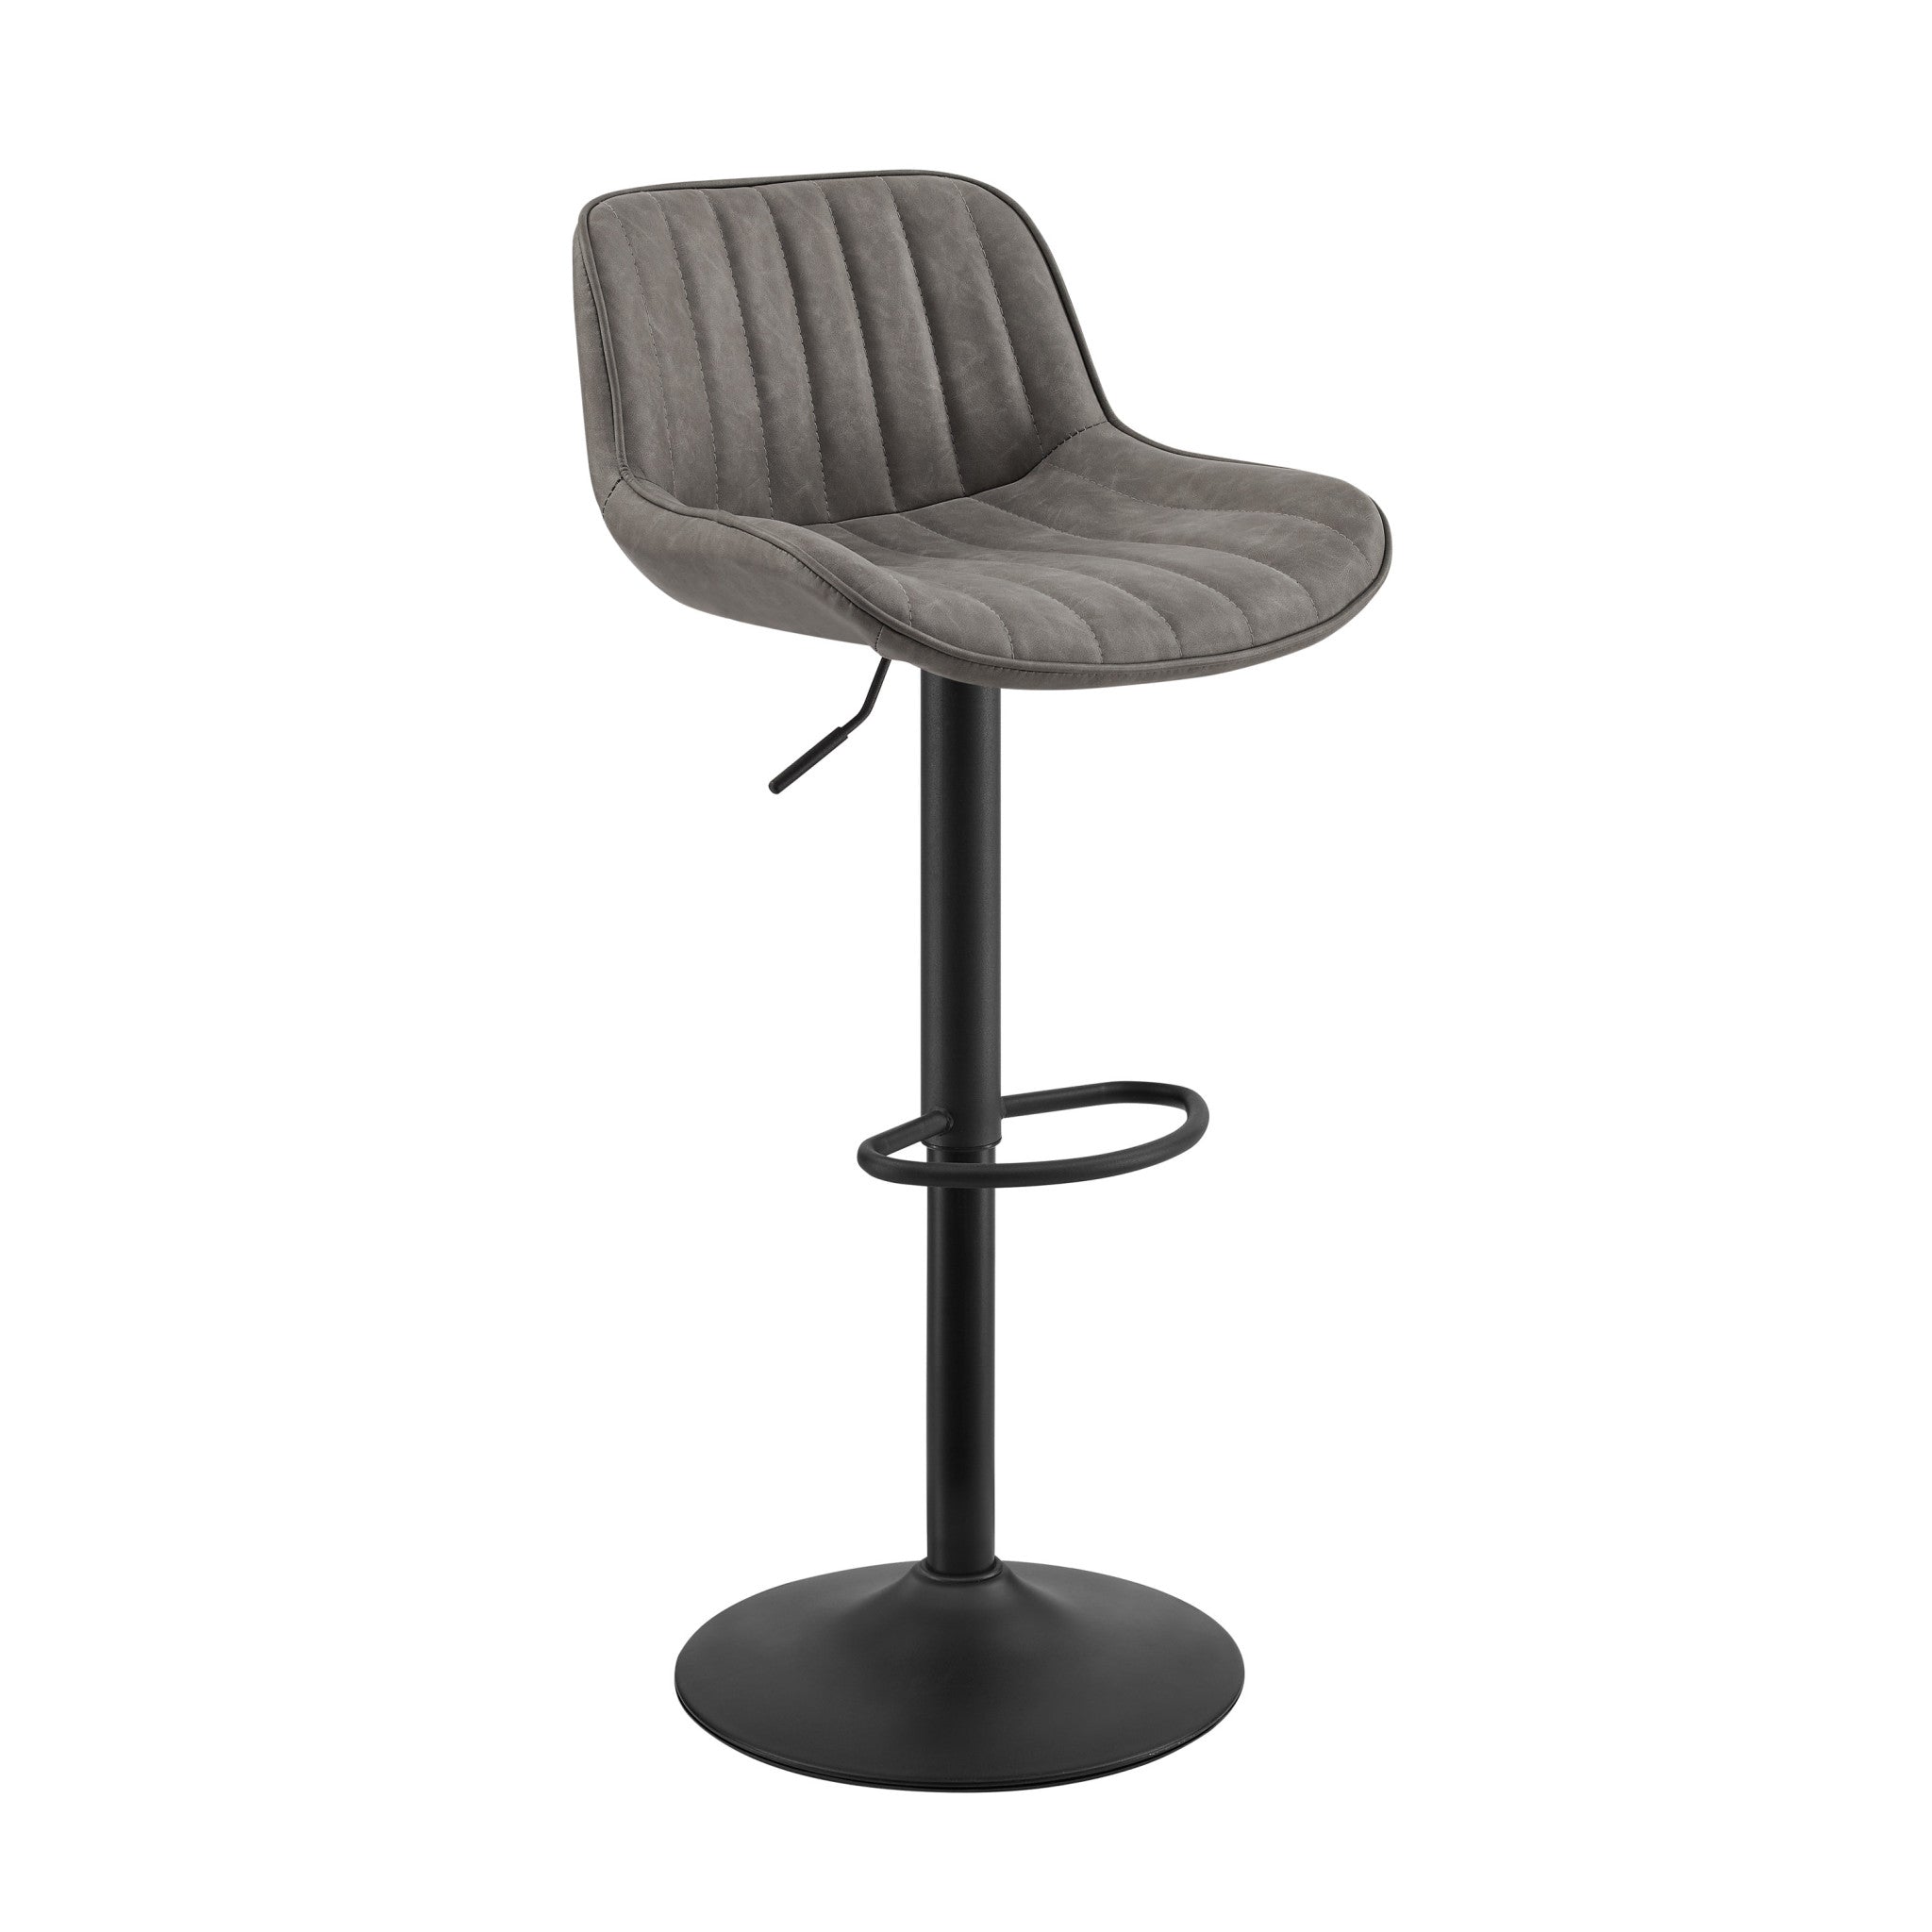 Set of Two 31" Gray And Black Faux Leather And Steel Swivel Low Back Adjustable Height Bar Chairs